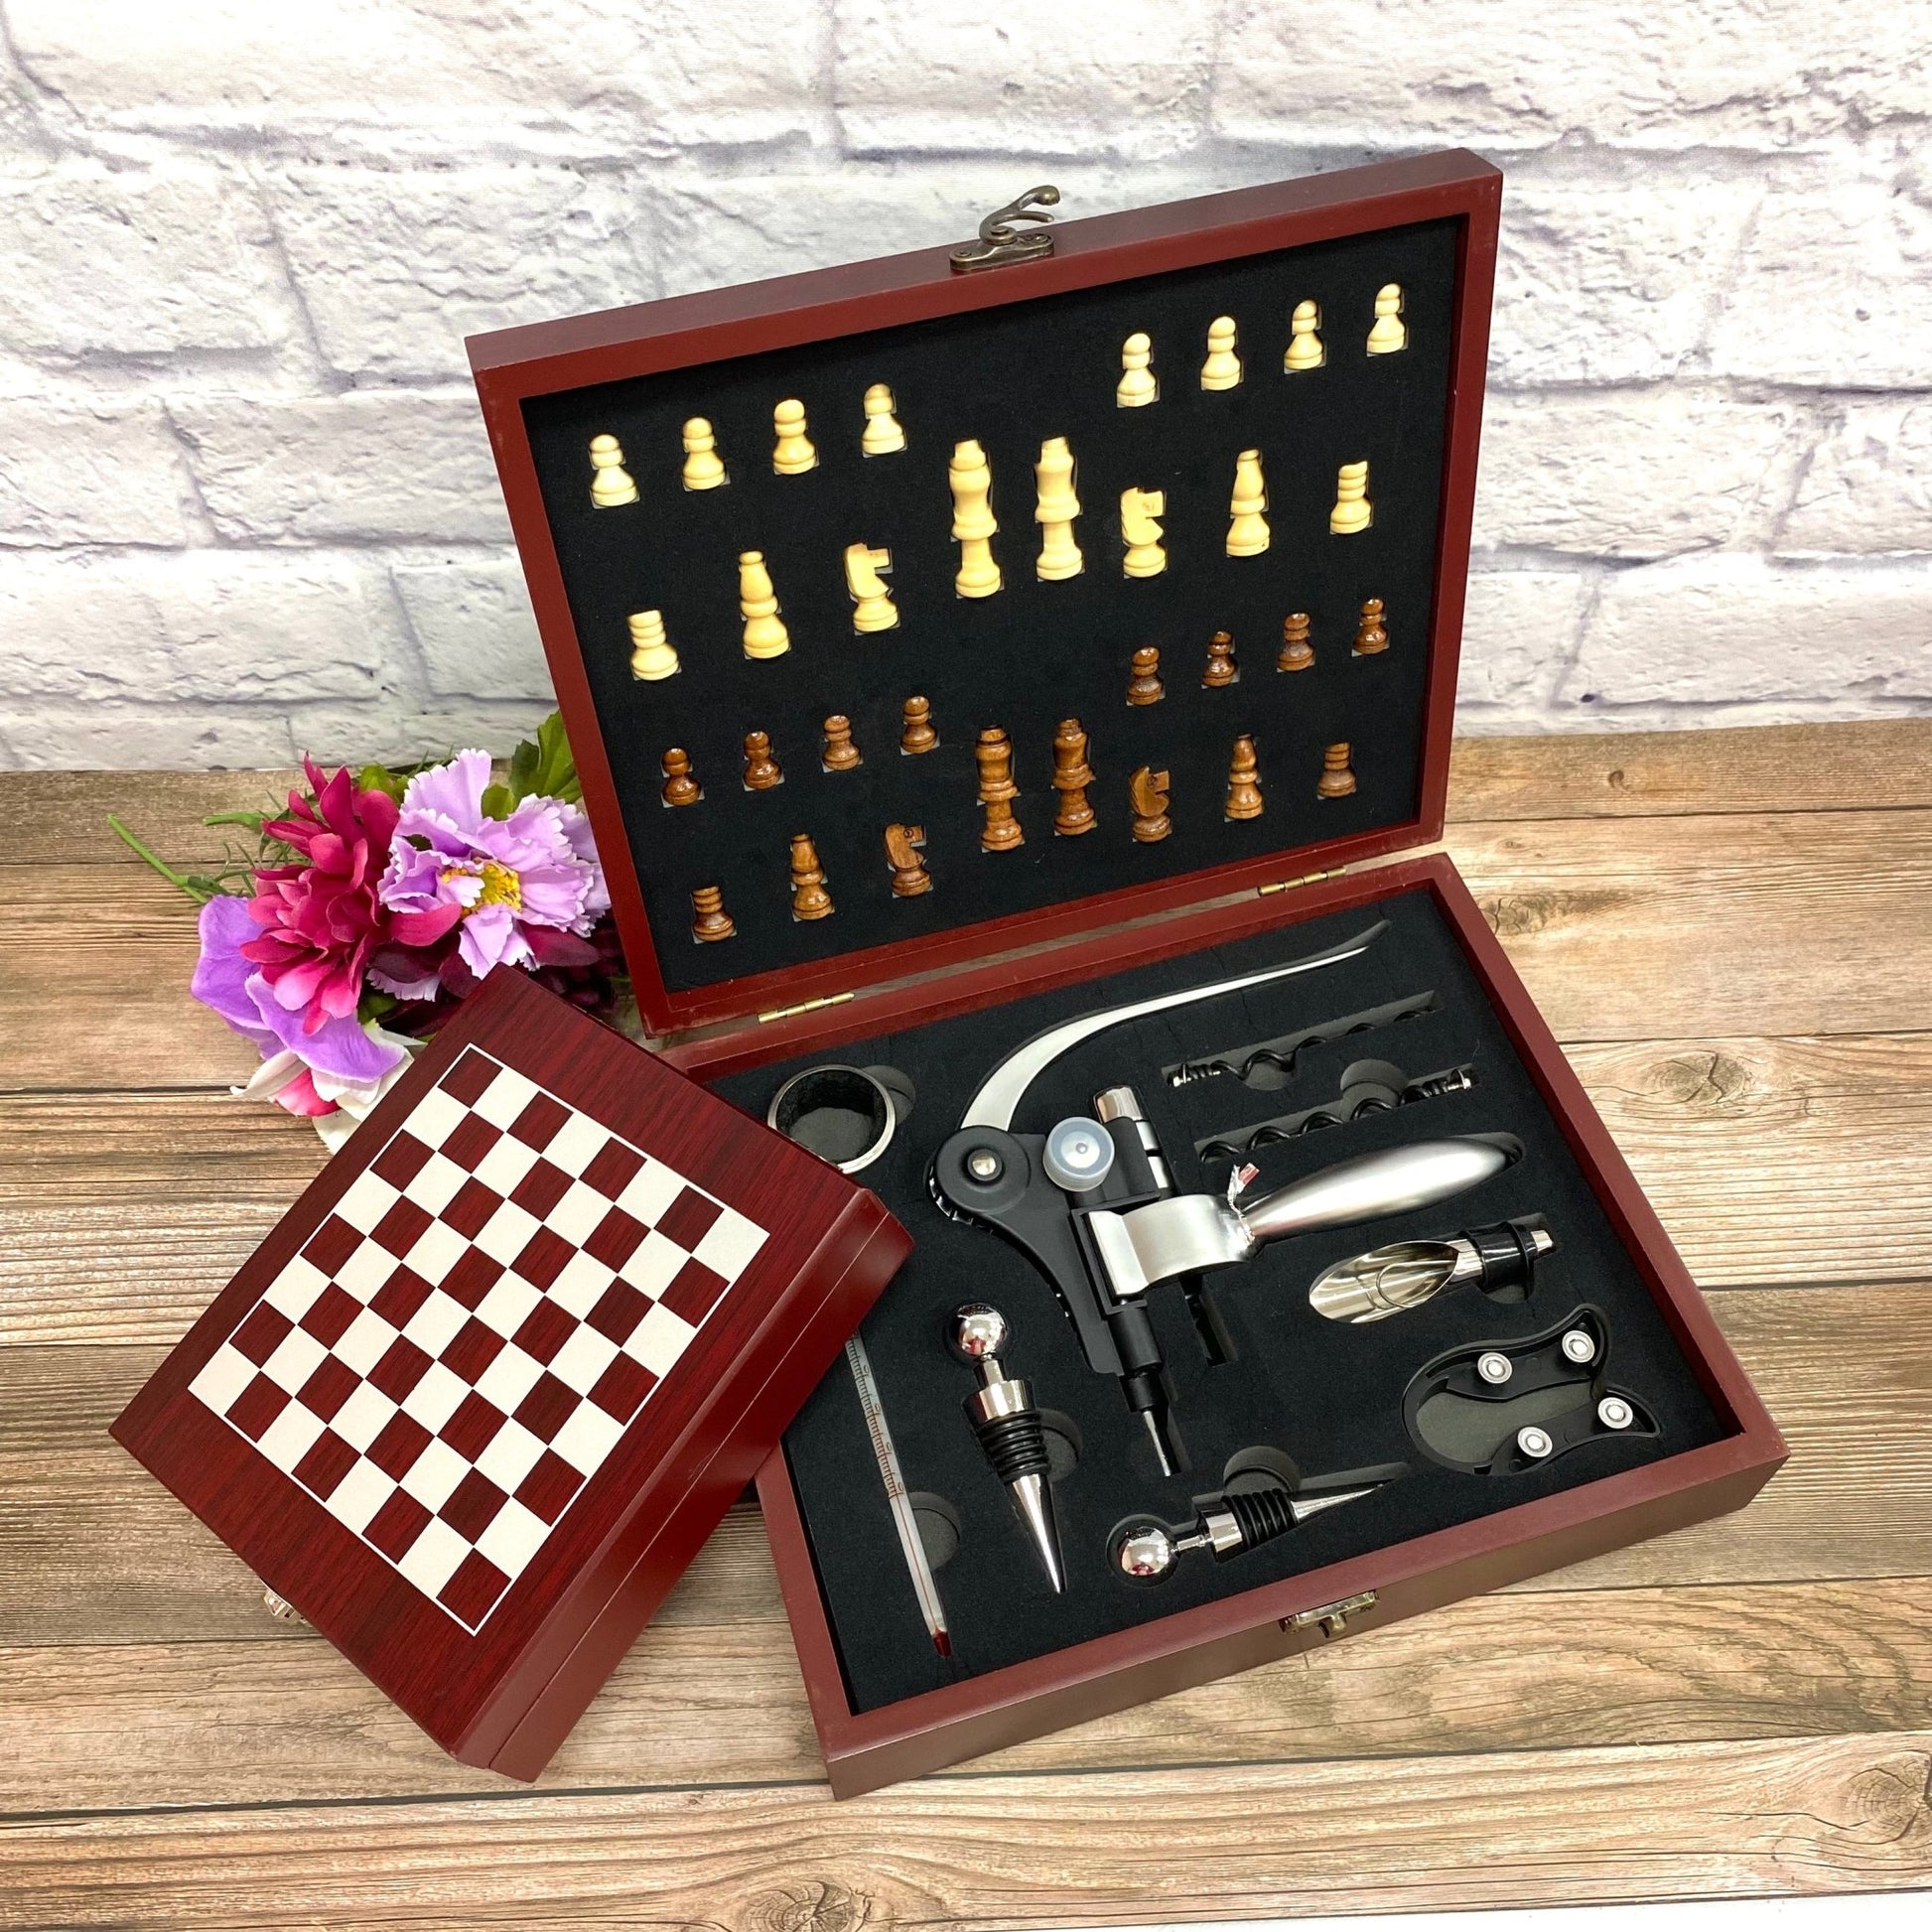 Wooden Chess Set Board Personalized Gift for Father Brother Son Anniversary Party Gift